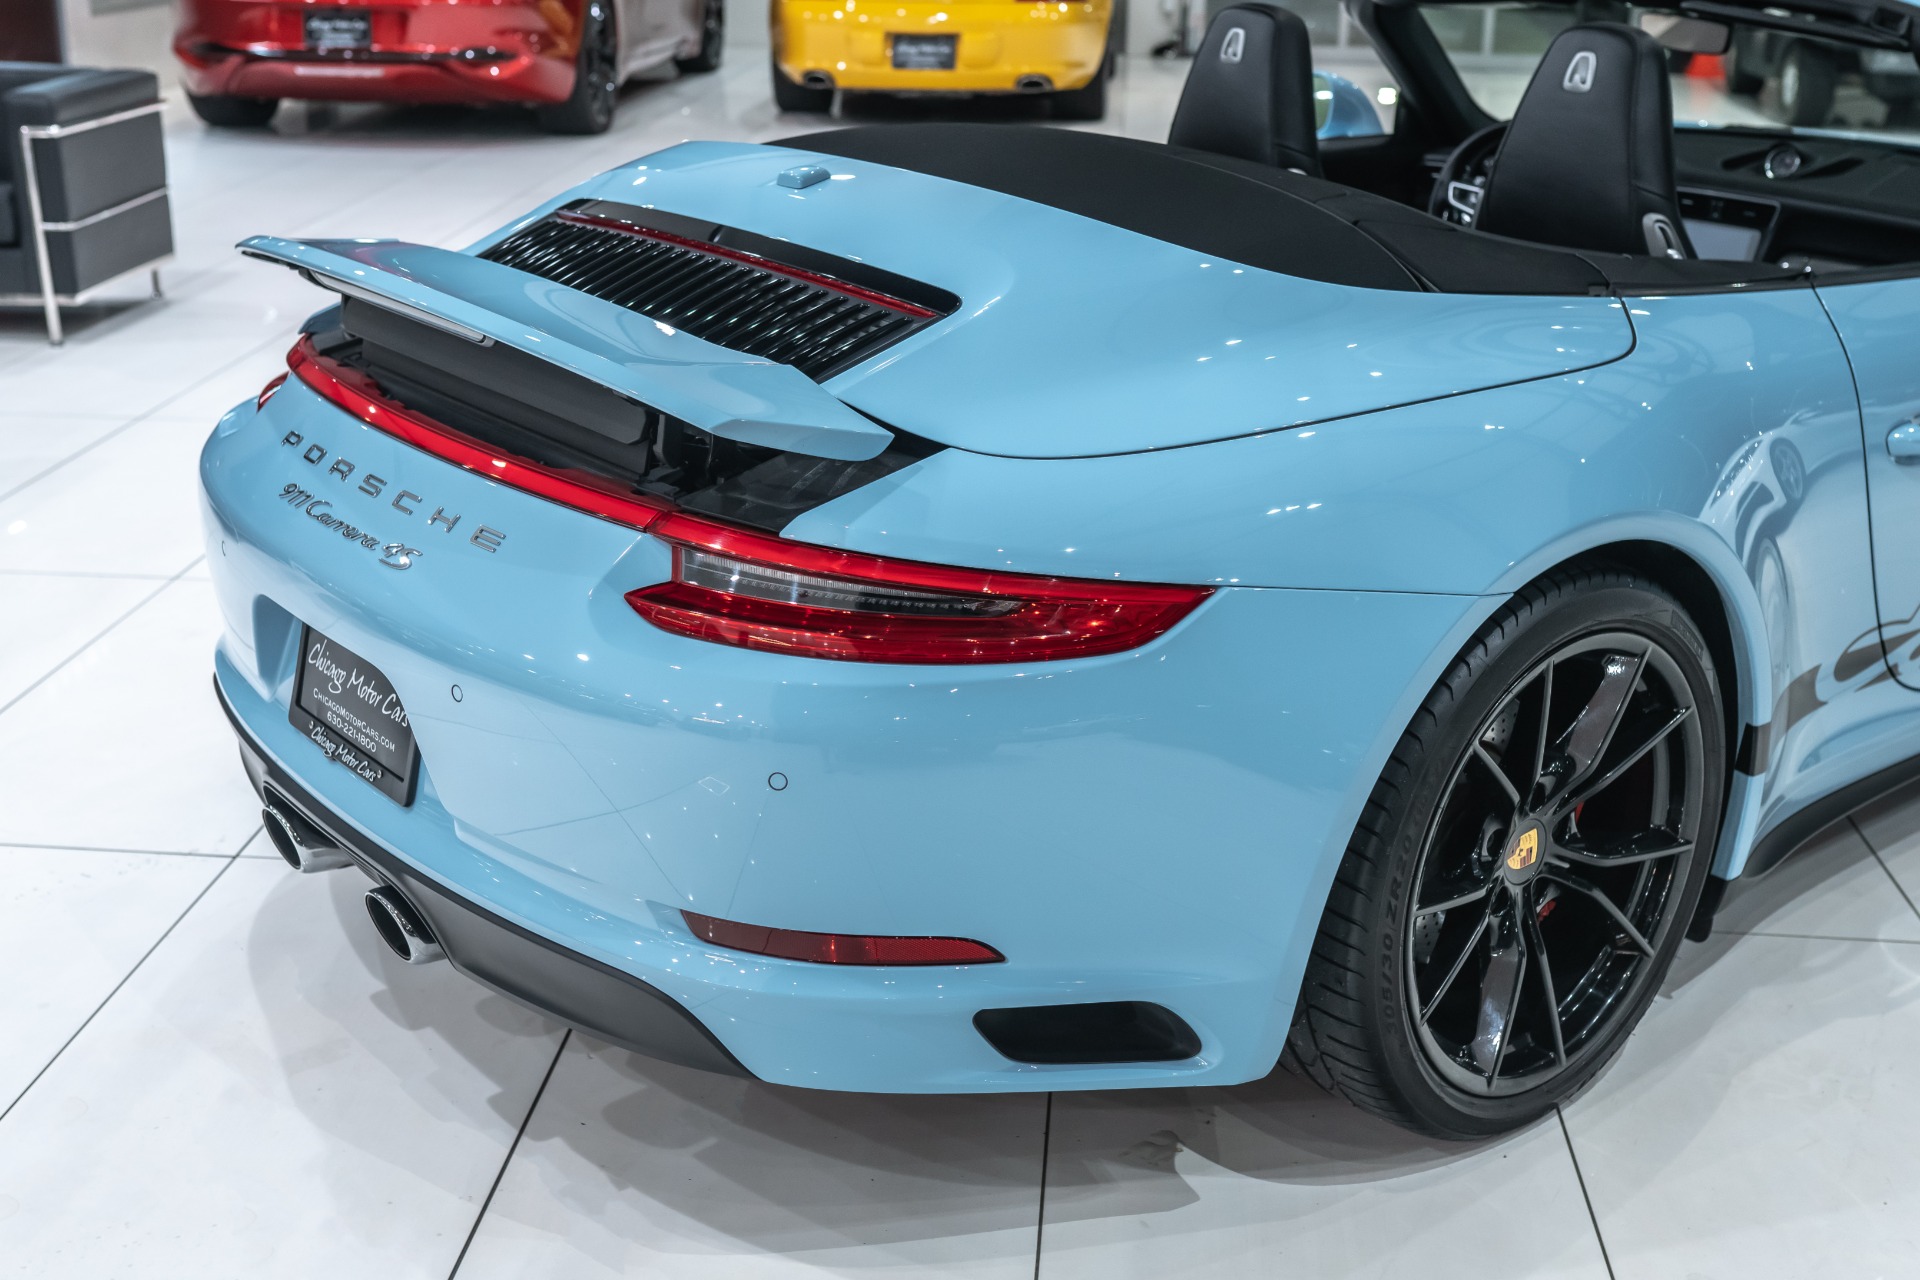 Used-2017-Porsche-911-Carrera-4S-All-Wheel-Drive-Cabriolet-Very-Rare-PTS-Gulf-Blue-154kMSRP